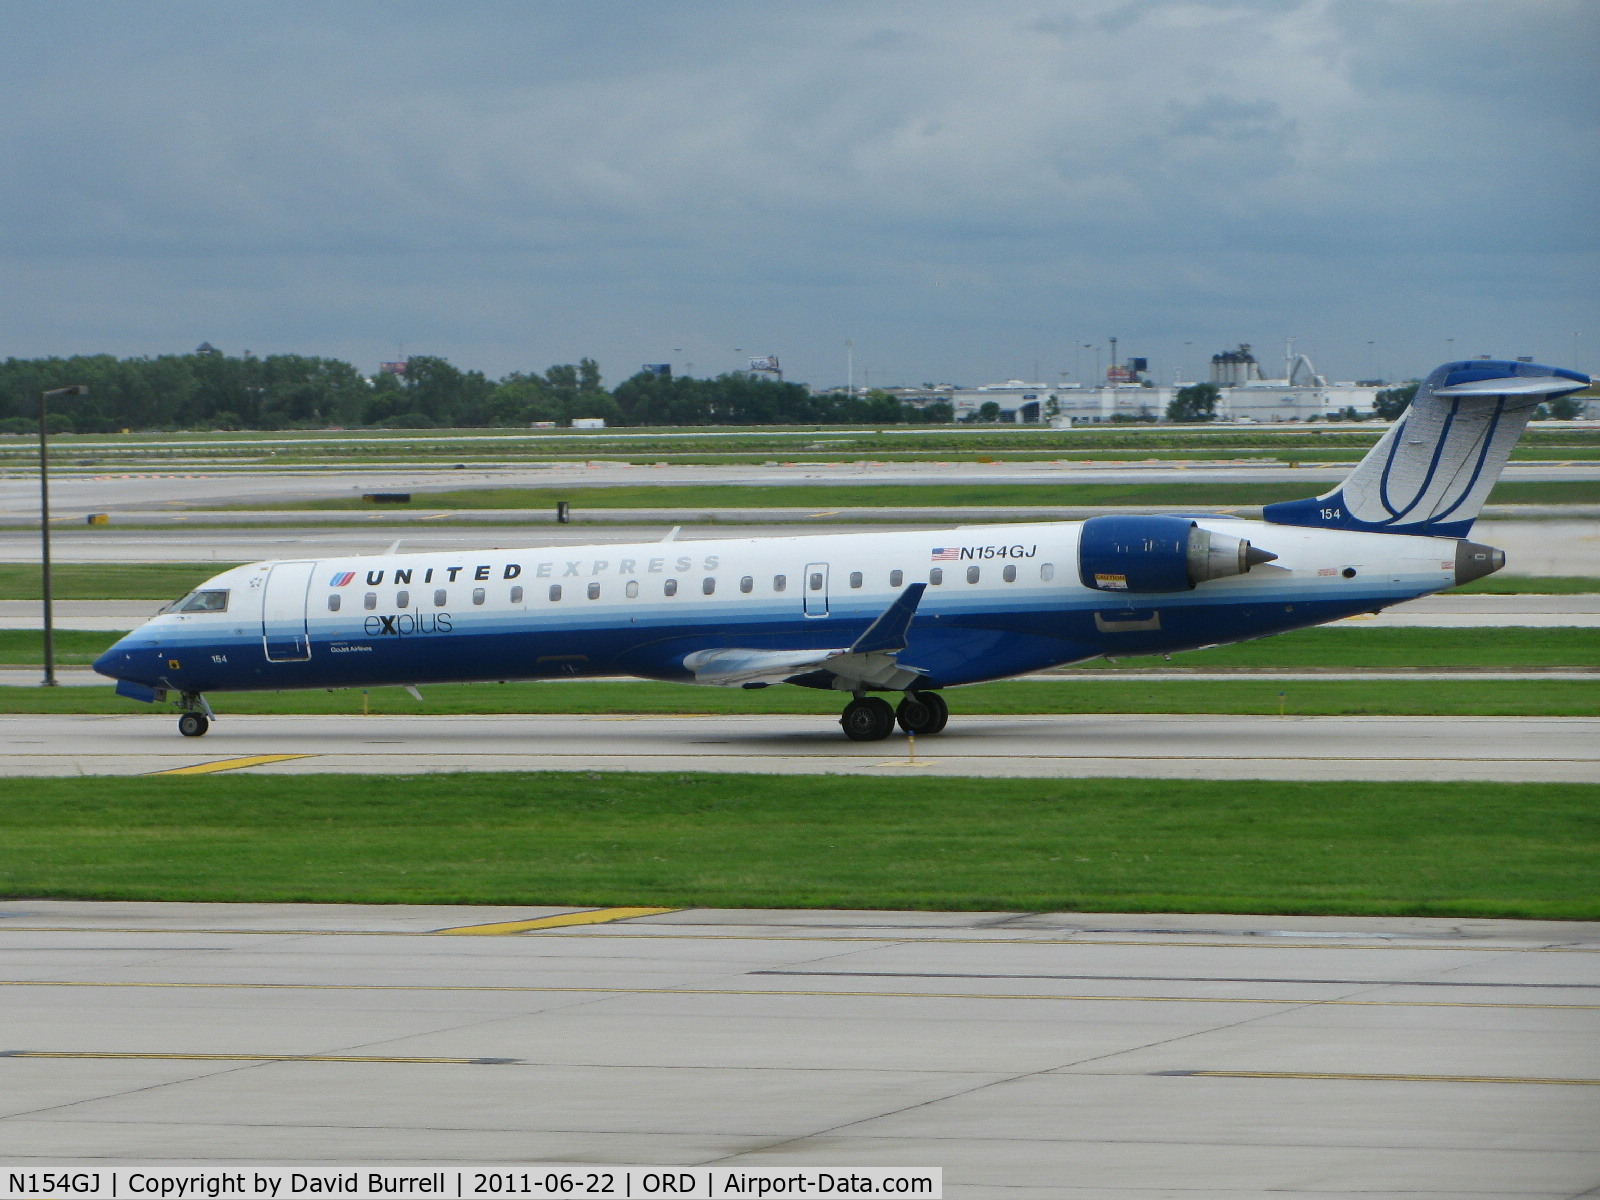 N154GJ, 2005 Bombardier CRJ-702 (CL-600-2C10) Regional Jet C/N 10224, United Express Bombardier CL-600-2C10 taxiing at Chicago O'hare Airport.